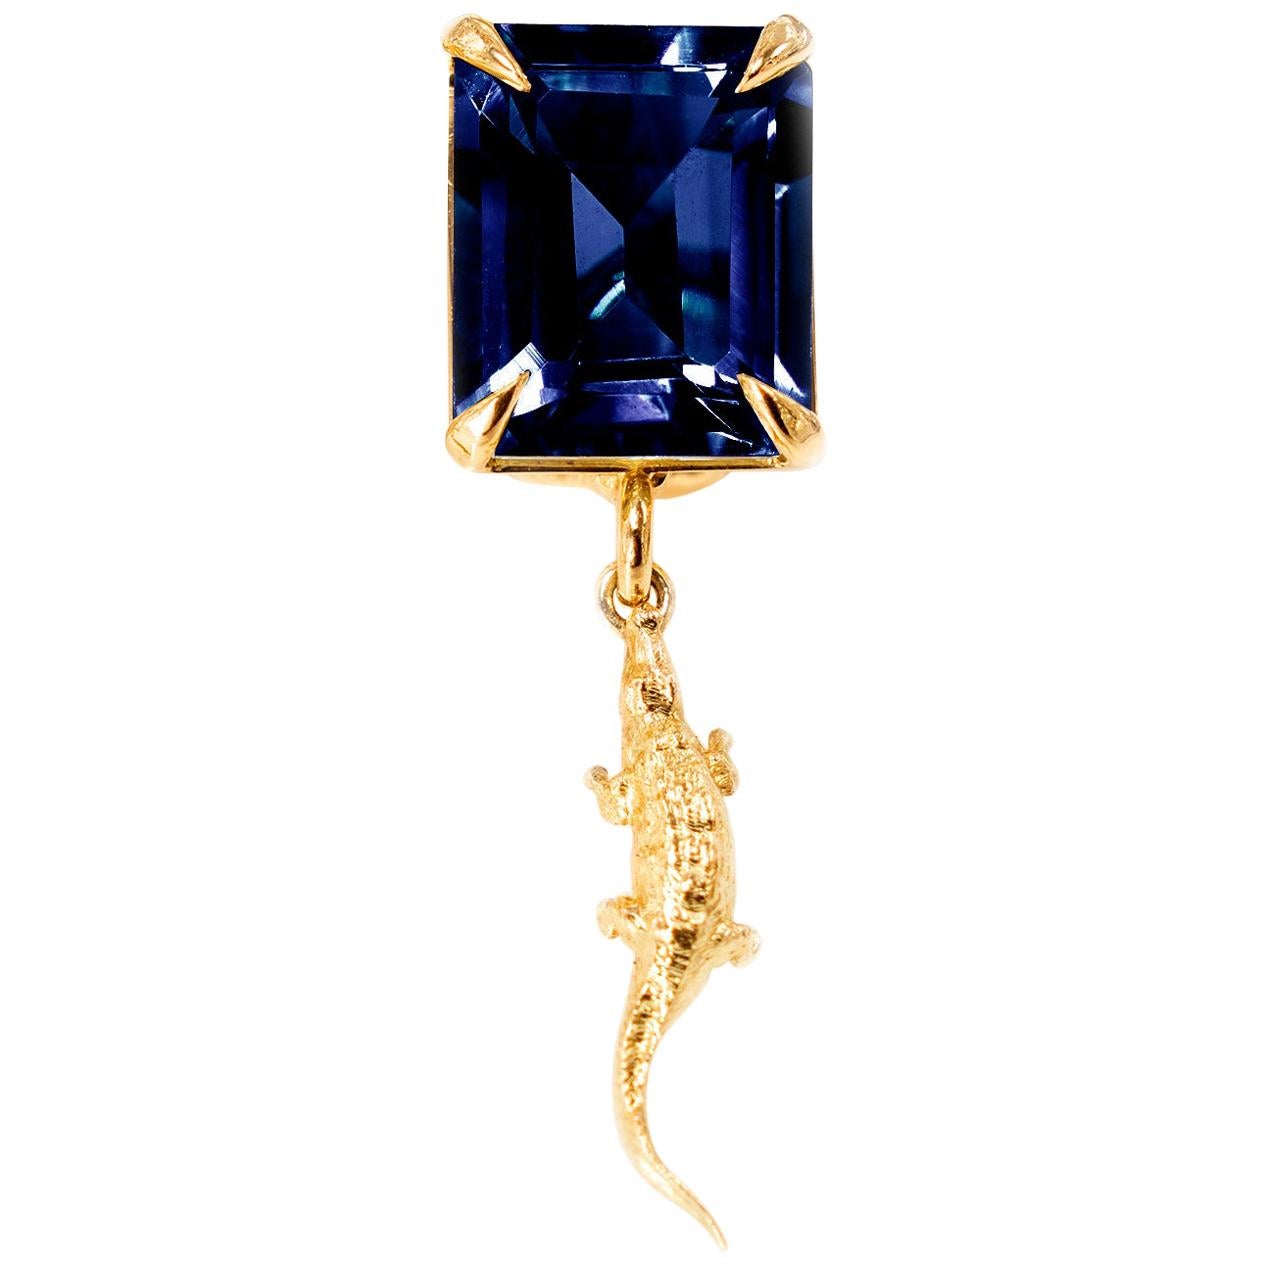 18 Karat Yellow Gold Mesopotamia Contemporary Brooch with Blue Sapphire